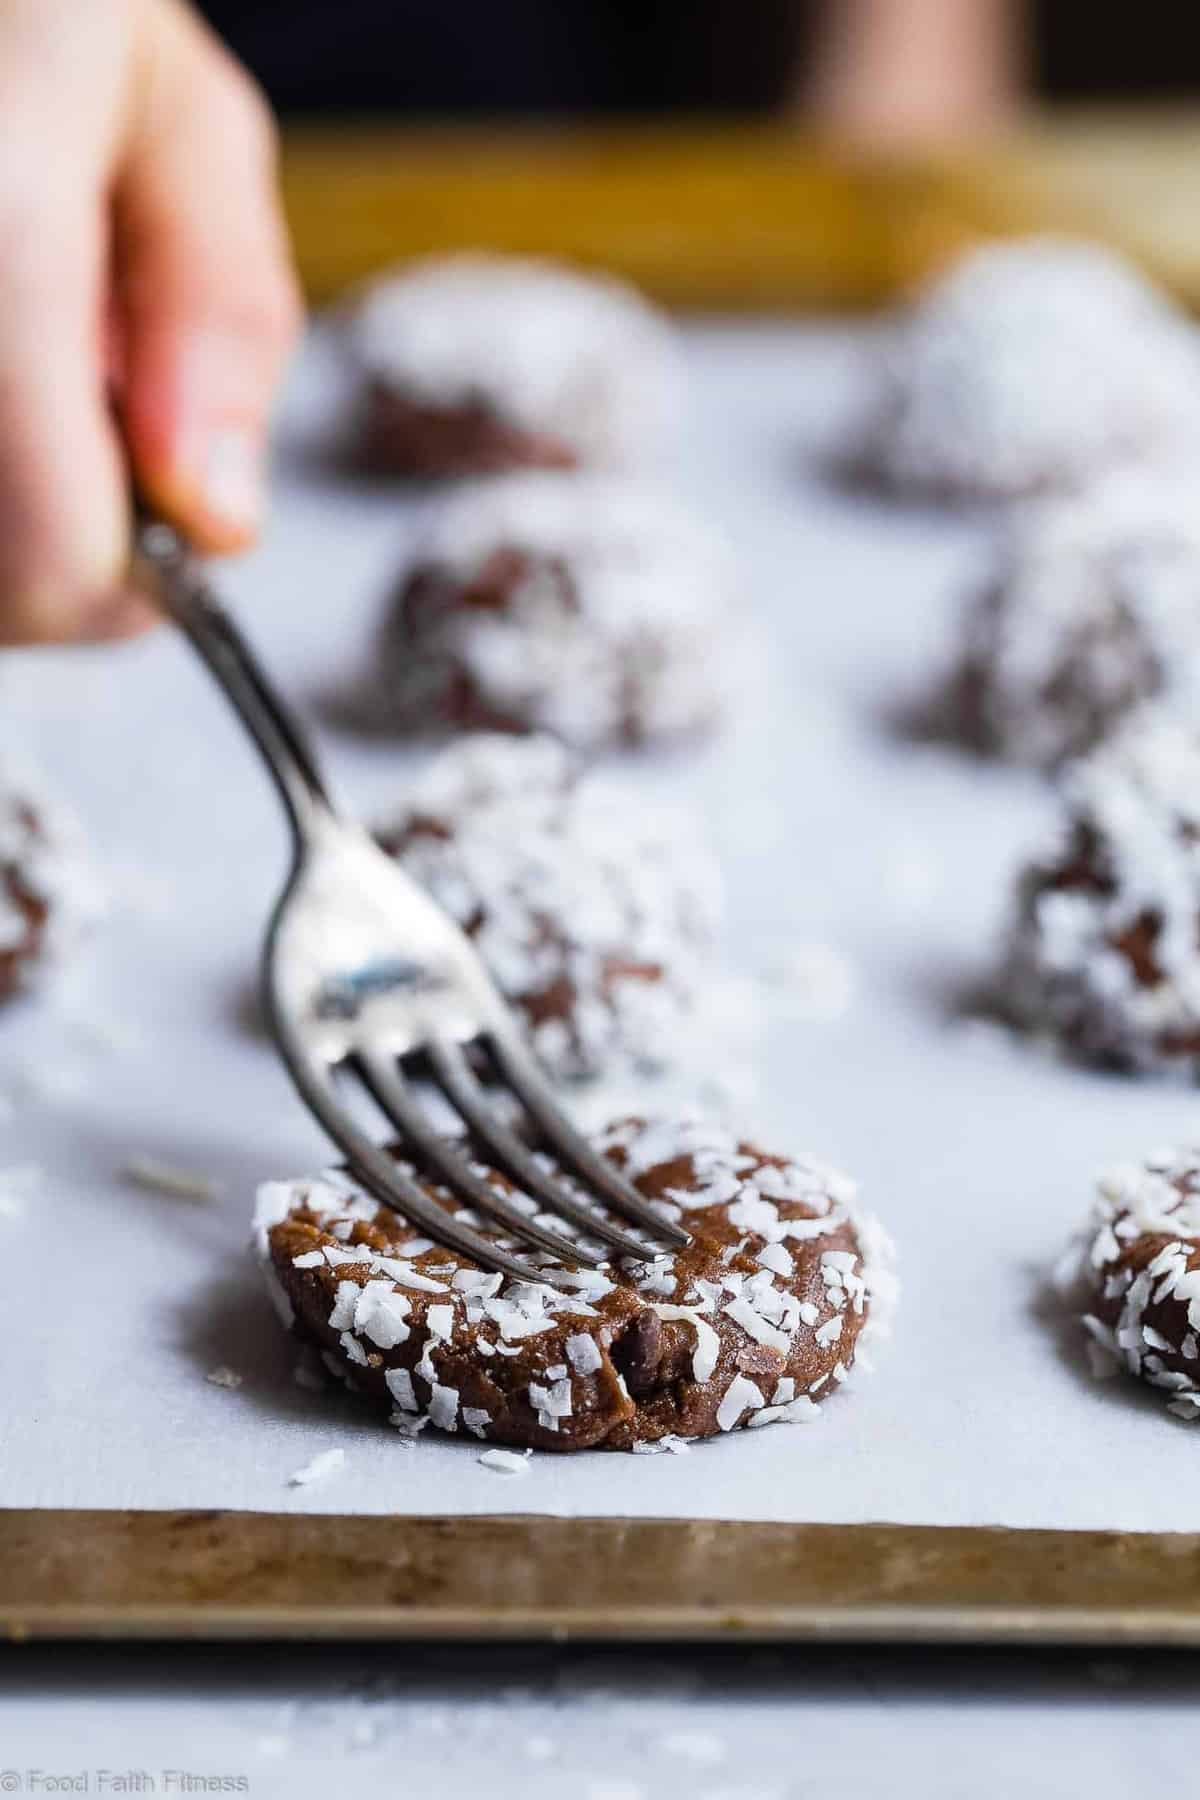 Almond Chocolate Chip Coconut Protein Cookie Recipe - This EASY protein cookie recipe use almond butter to make them extra soft and chewy! You will never know these are gluten free, healthy and packed with protein! | #Foodfaithfitness | #Glutenfree #Healthy #Cookies #Coconut #ChocolateChip